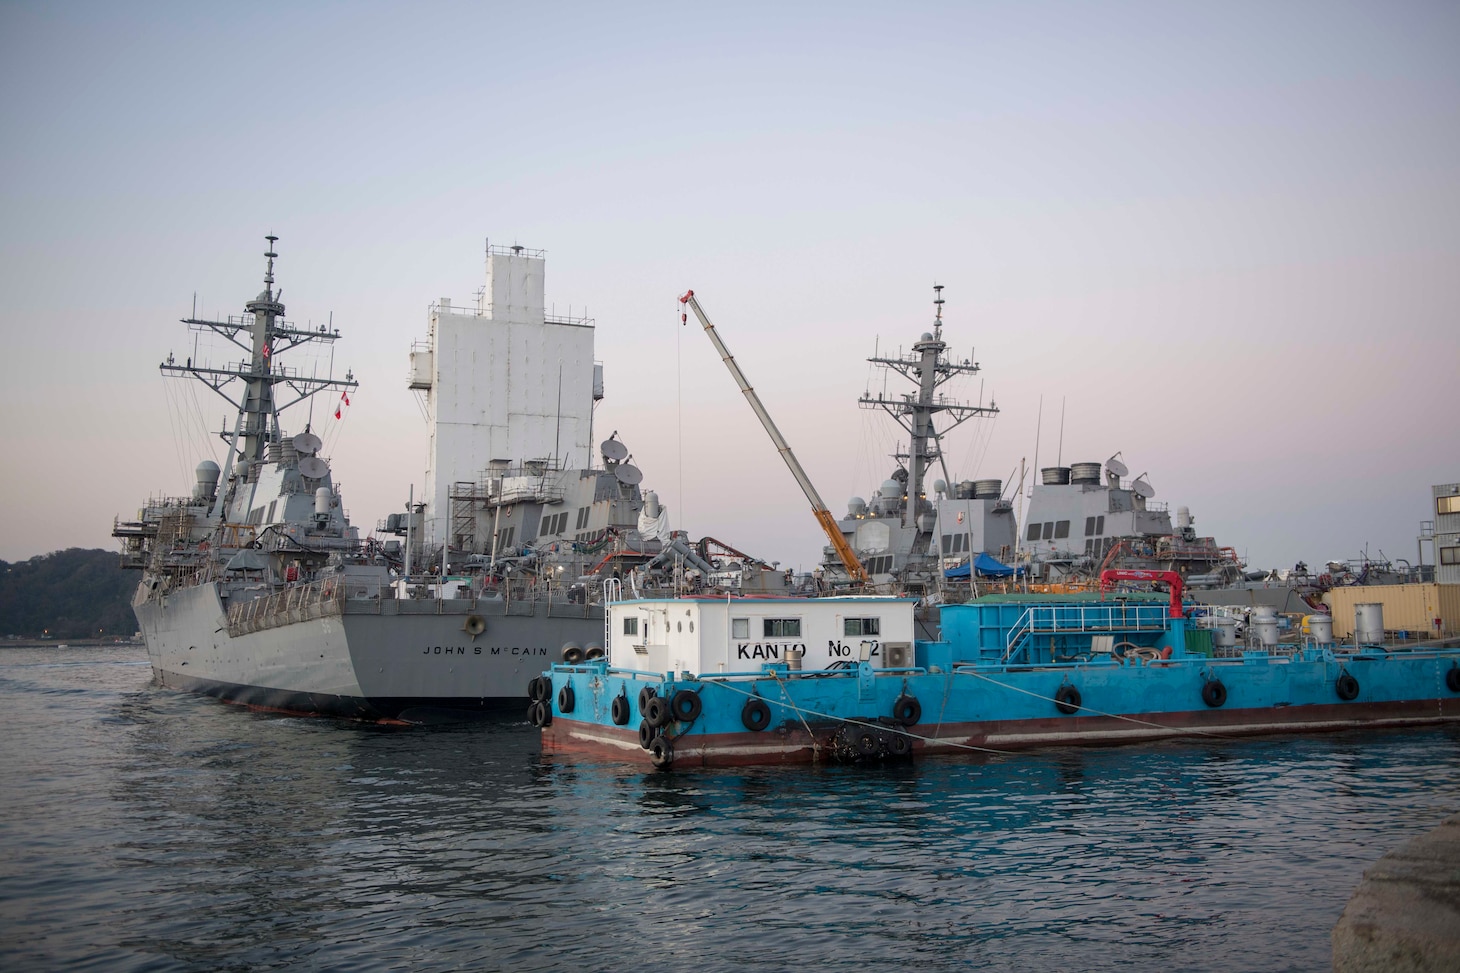 YOKOSUKA, Japan (Nov. 27, 2018) The Arleigh Burke-class guided missile destroyer USS John S. McCain (DDG 56) sits pierside after departing from a dry dock at Fleet Activities Yokosuka. McCain departed the dock after an extensive maintenance period in order to sustain the ship's ablity to serve as a forward-deployed asset in the U.S. 7th Fleet area of operations.